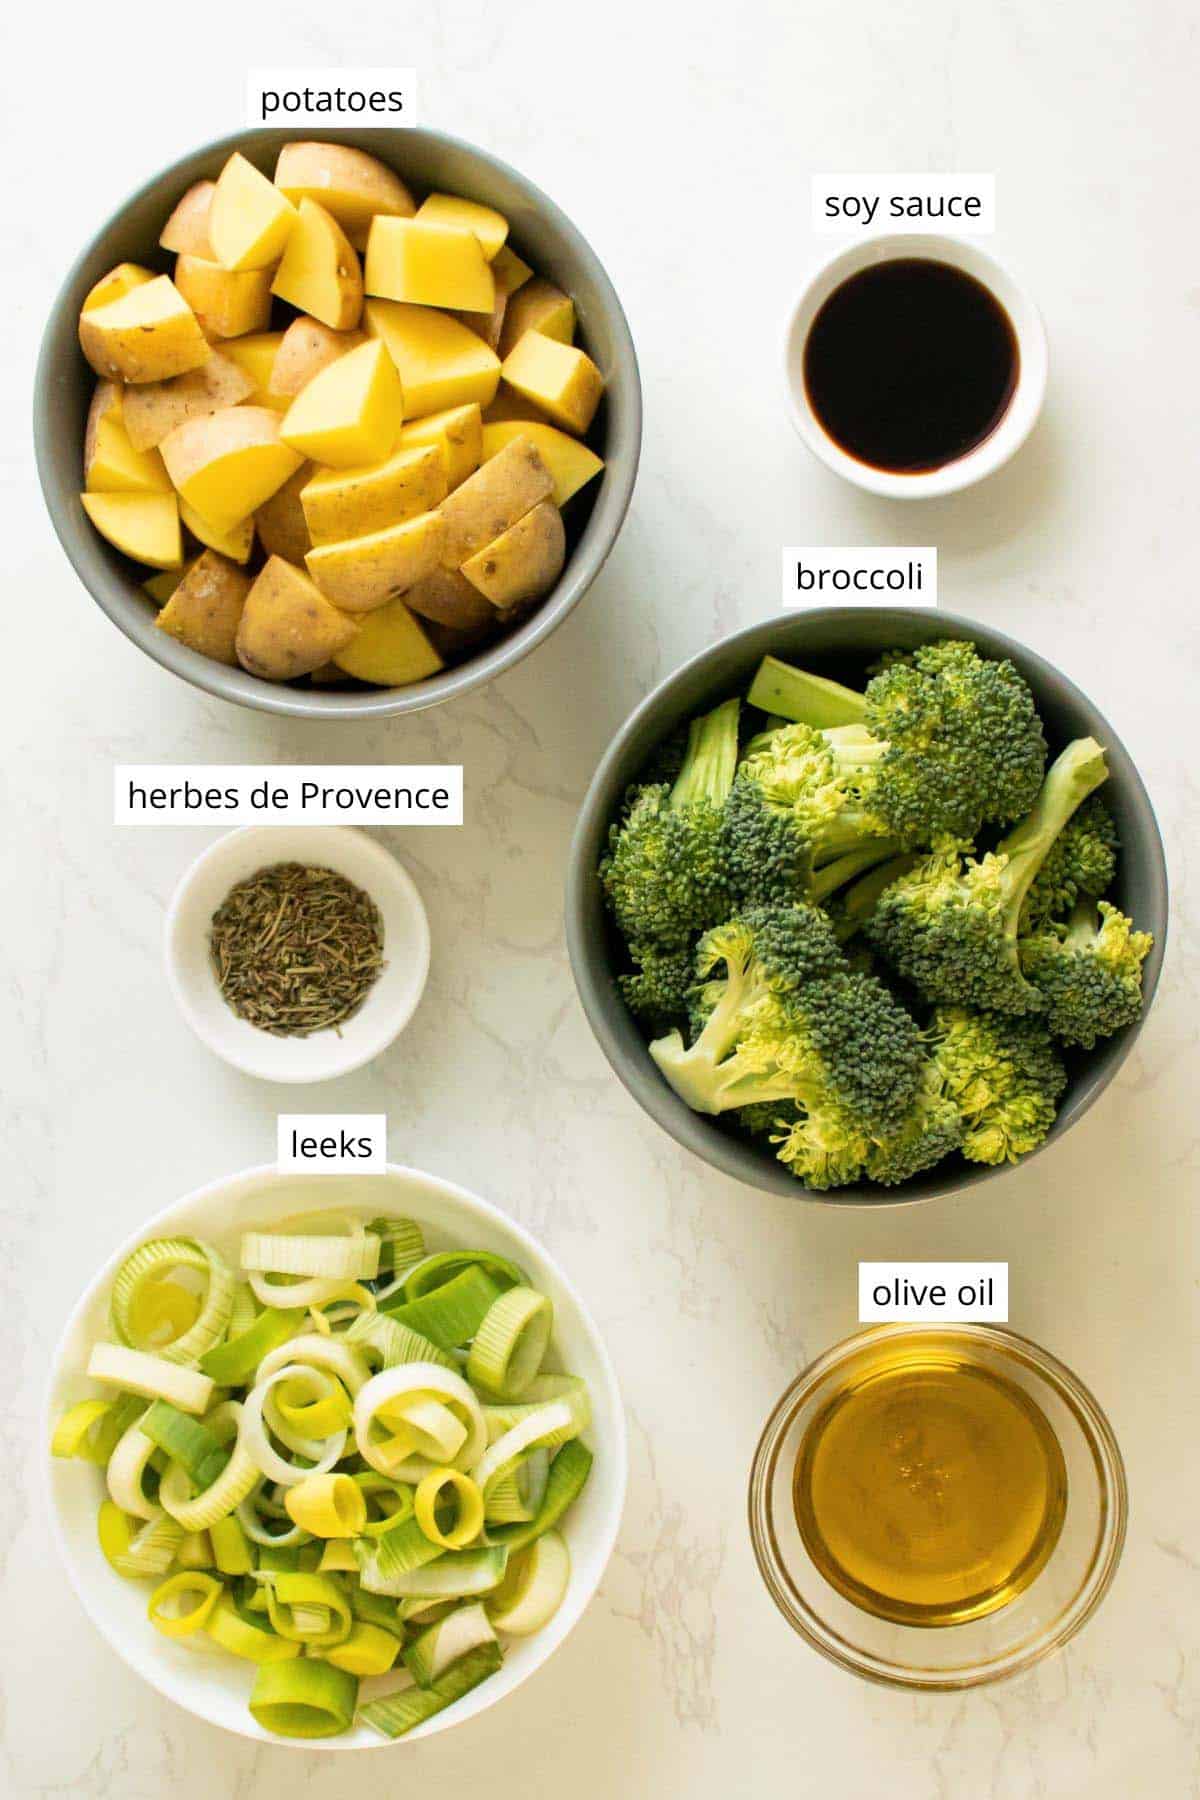 potatoes, broccoli, leeks, oil, herbs, and soy sauce in bowls on a marble table